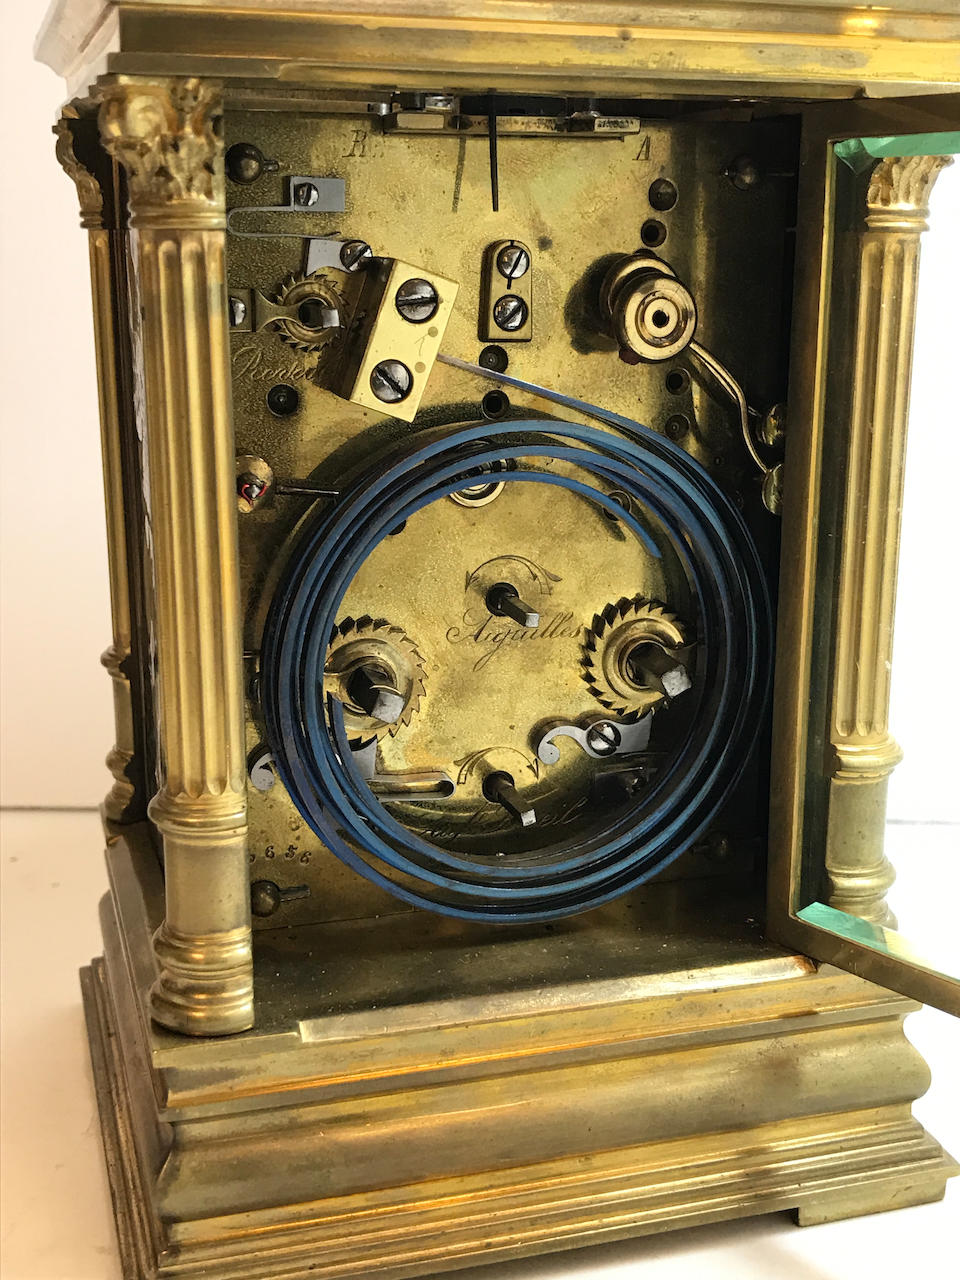 A fine quarter repeating alarm carriage clock with Limoges enamel panelsLast quarter 19th century